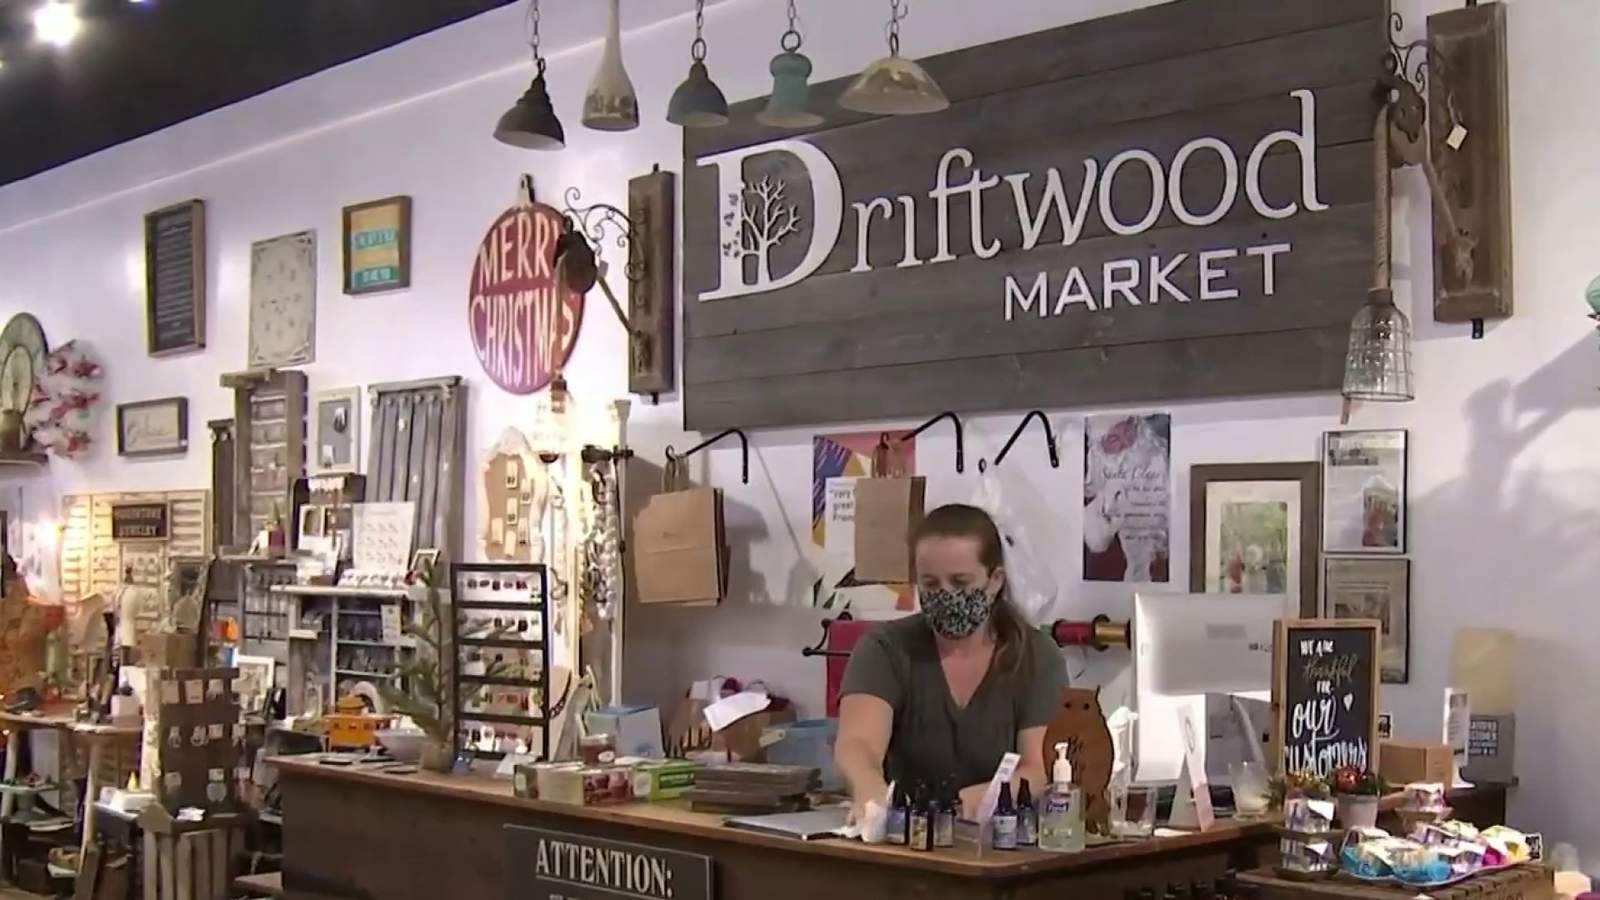 Owners hoping for big boost on Small Business Saturday